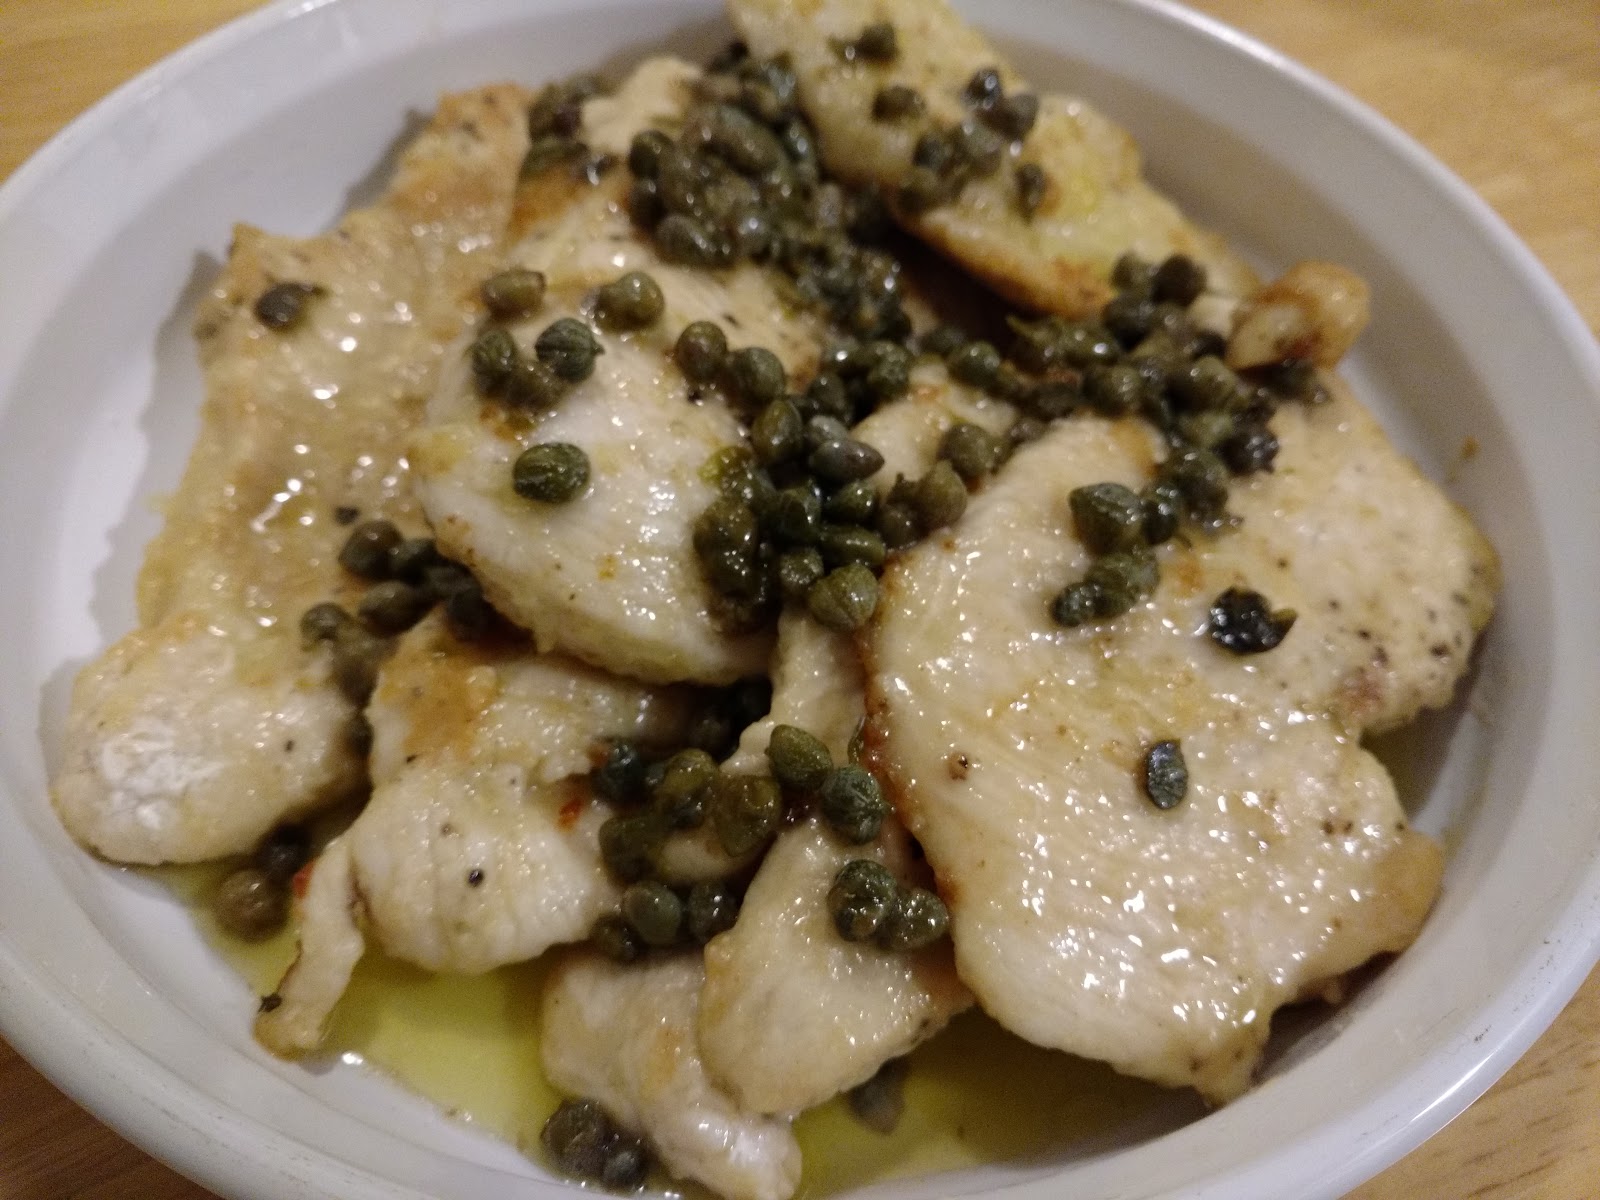 &amp;quot;So what are you making for dinner?&amp;quot;: Chicken Piccata